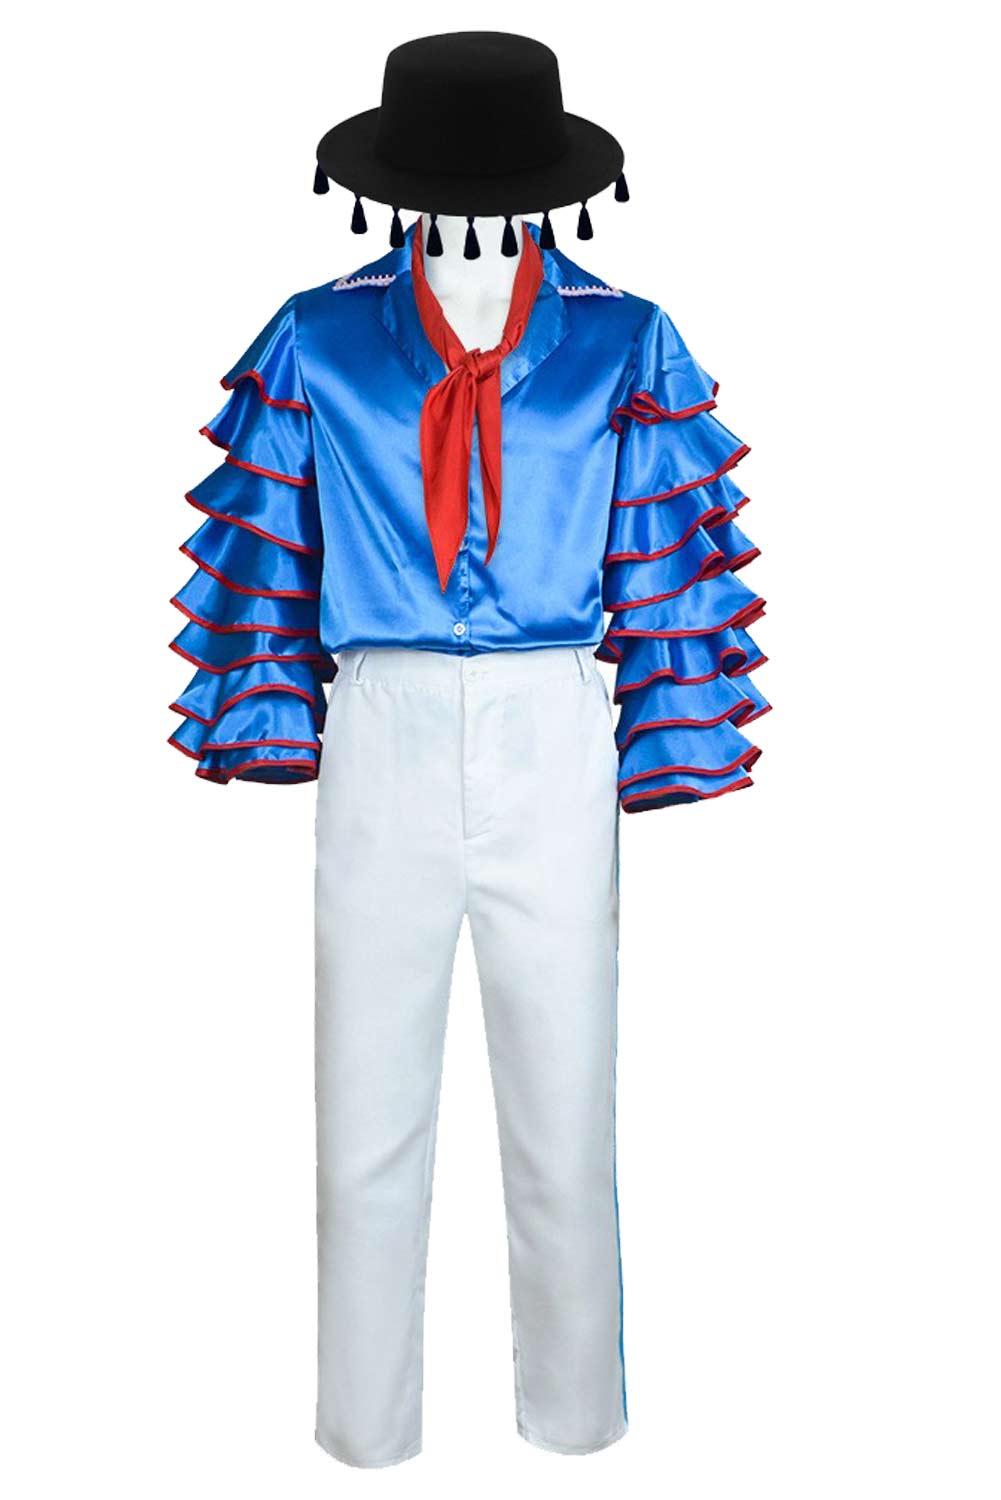 Movie The Mask Jim Carrey Stanley Ipkiss Blue Disco Uniform Set Outfits Halloween Carnival Suit Cosplay Costume